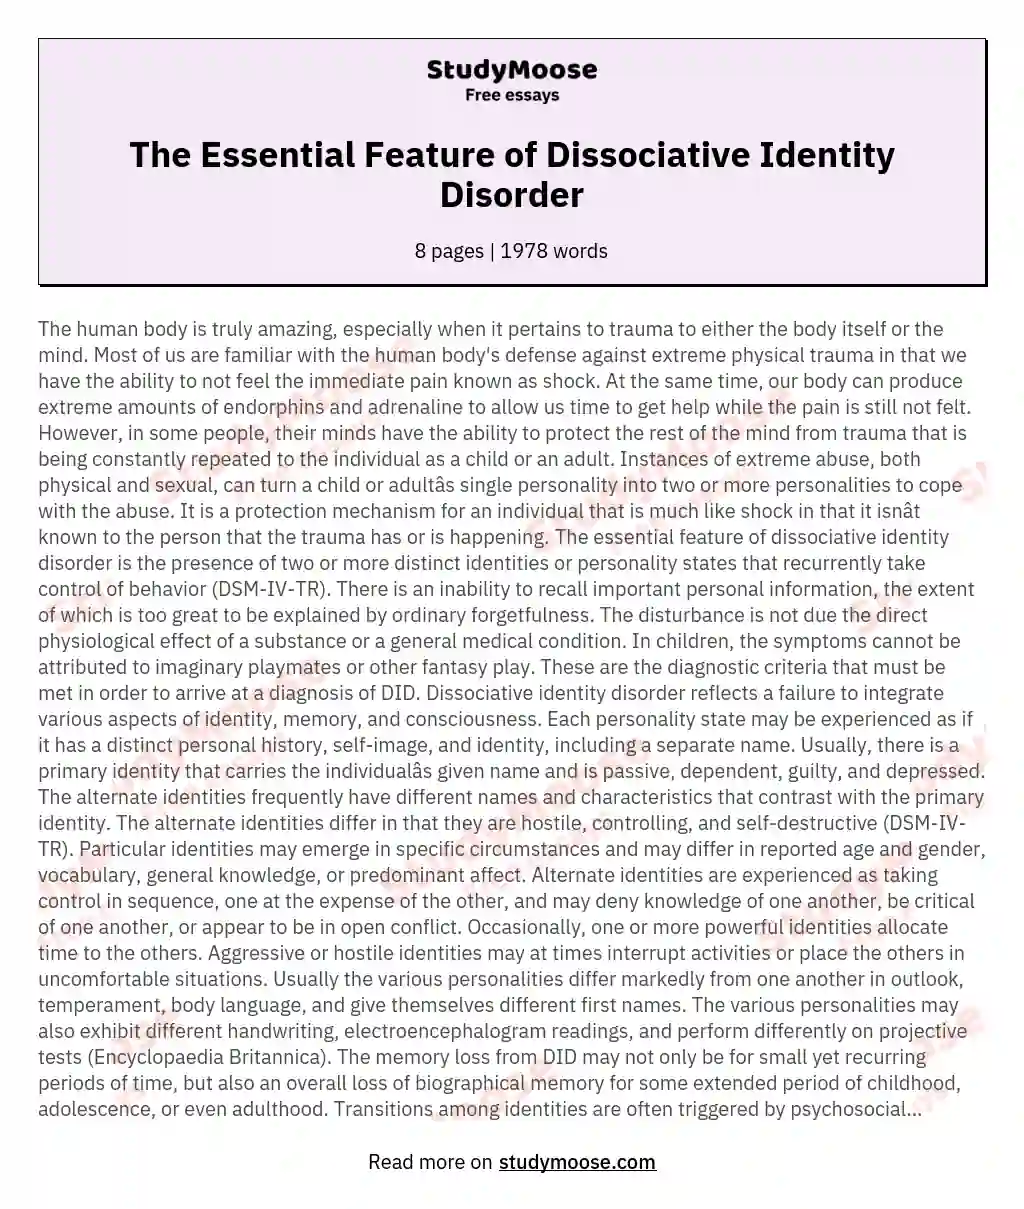 The Essential Feature of Dissociative Identity Disorder essay